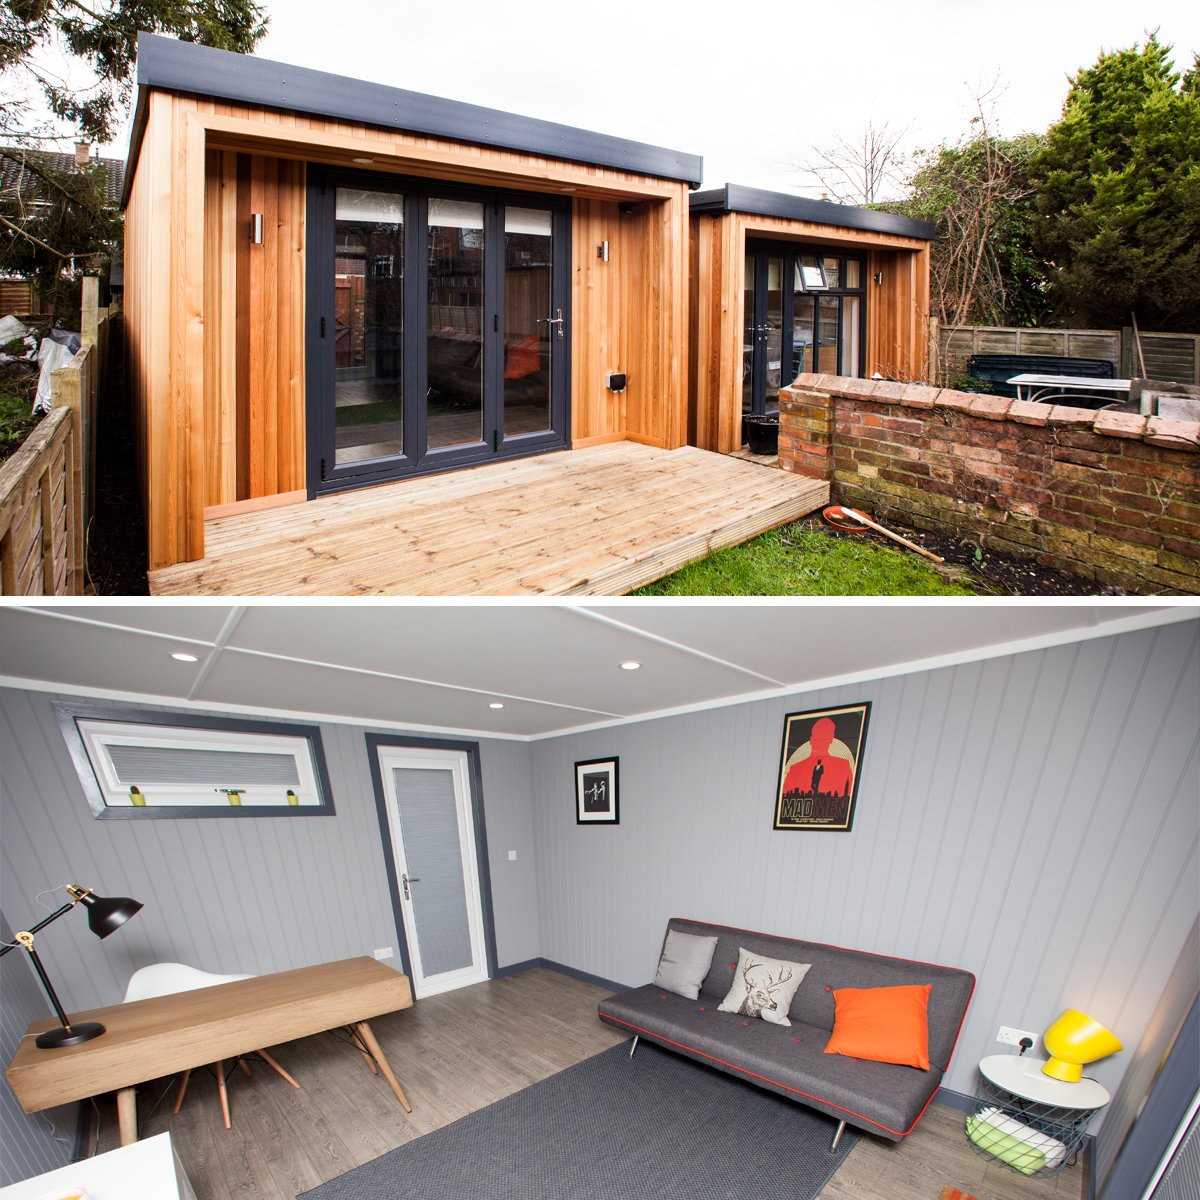 Wooden garden office with a shed - Cabin Master UK